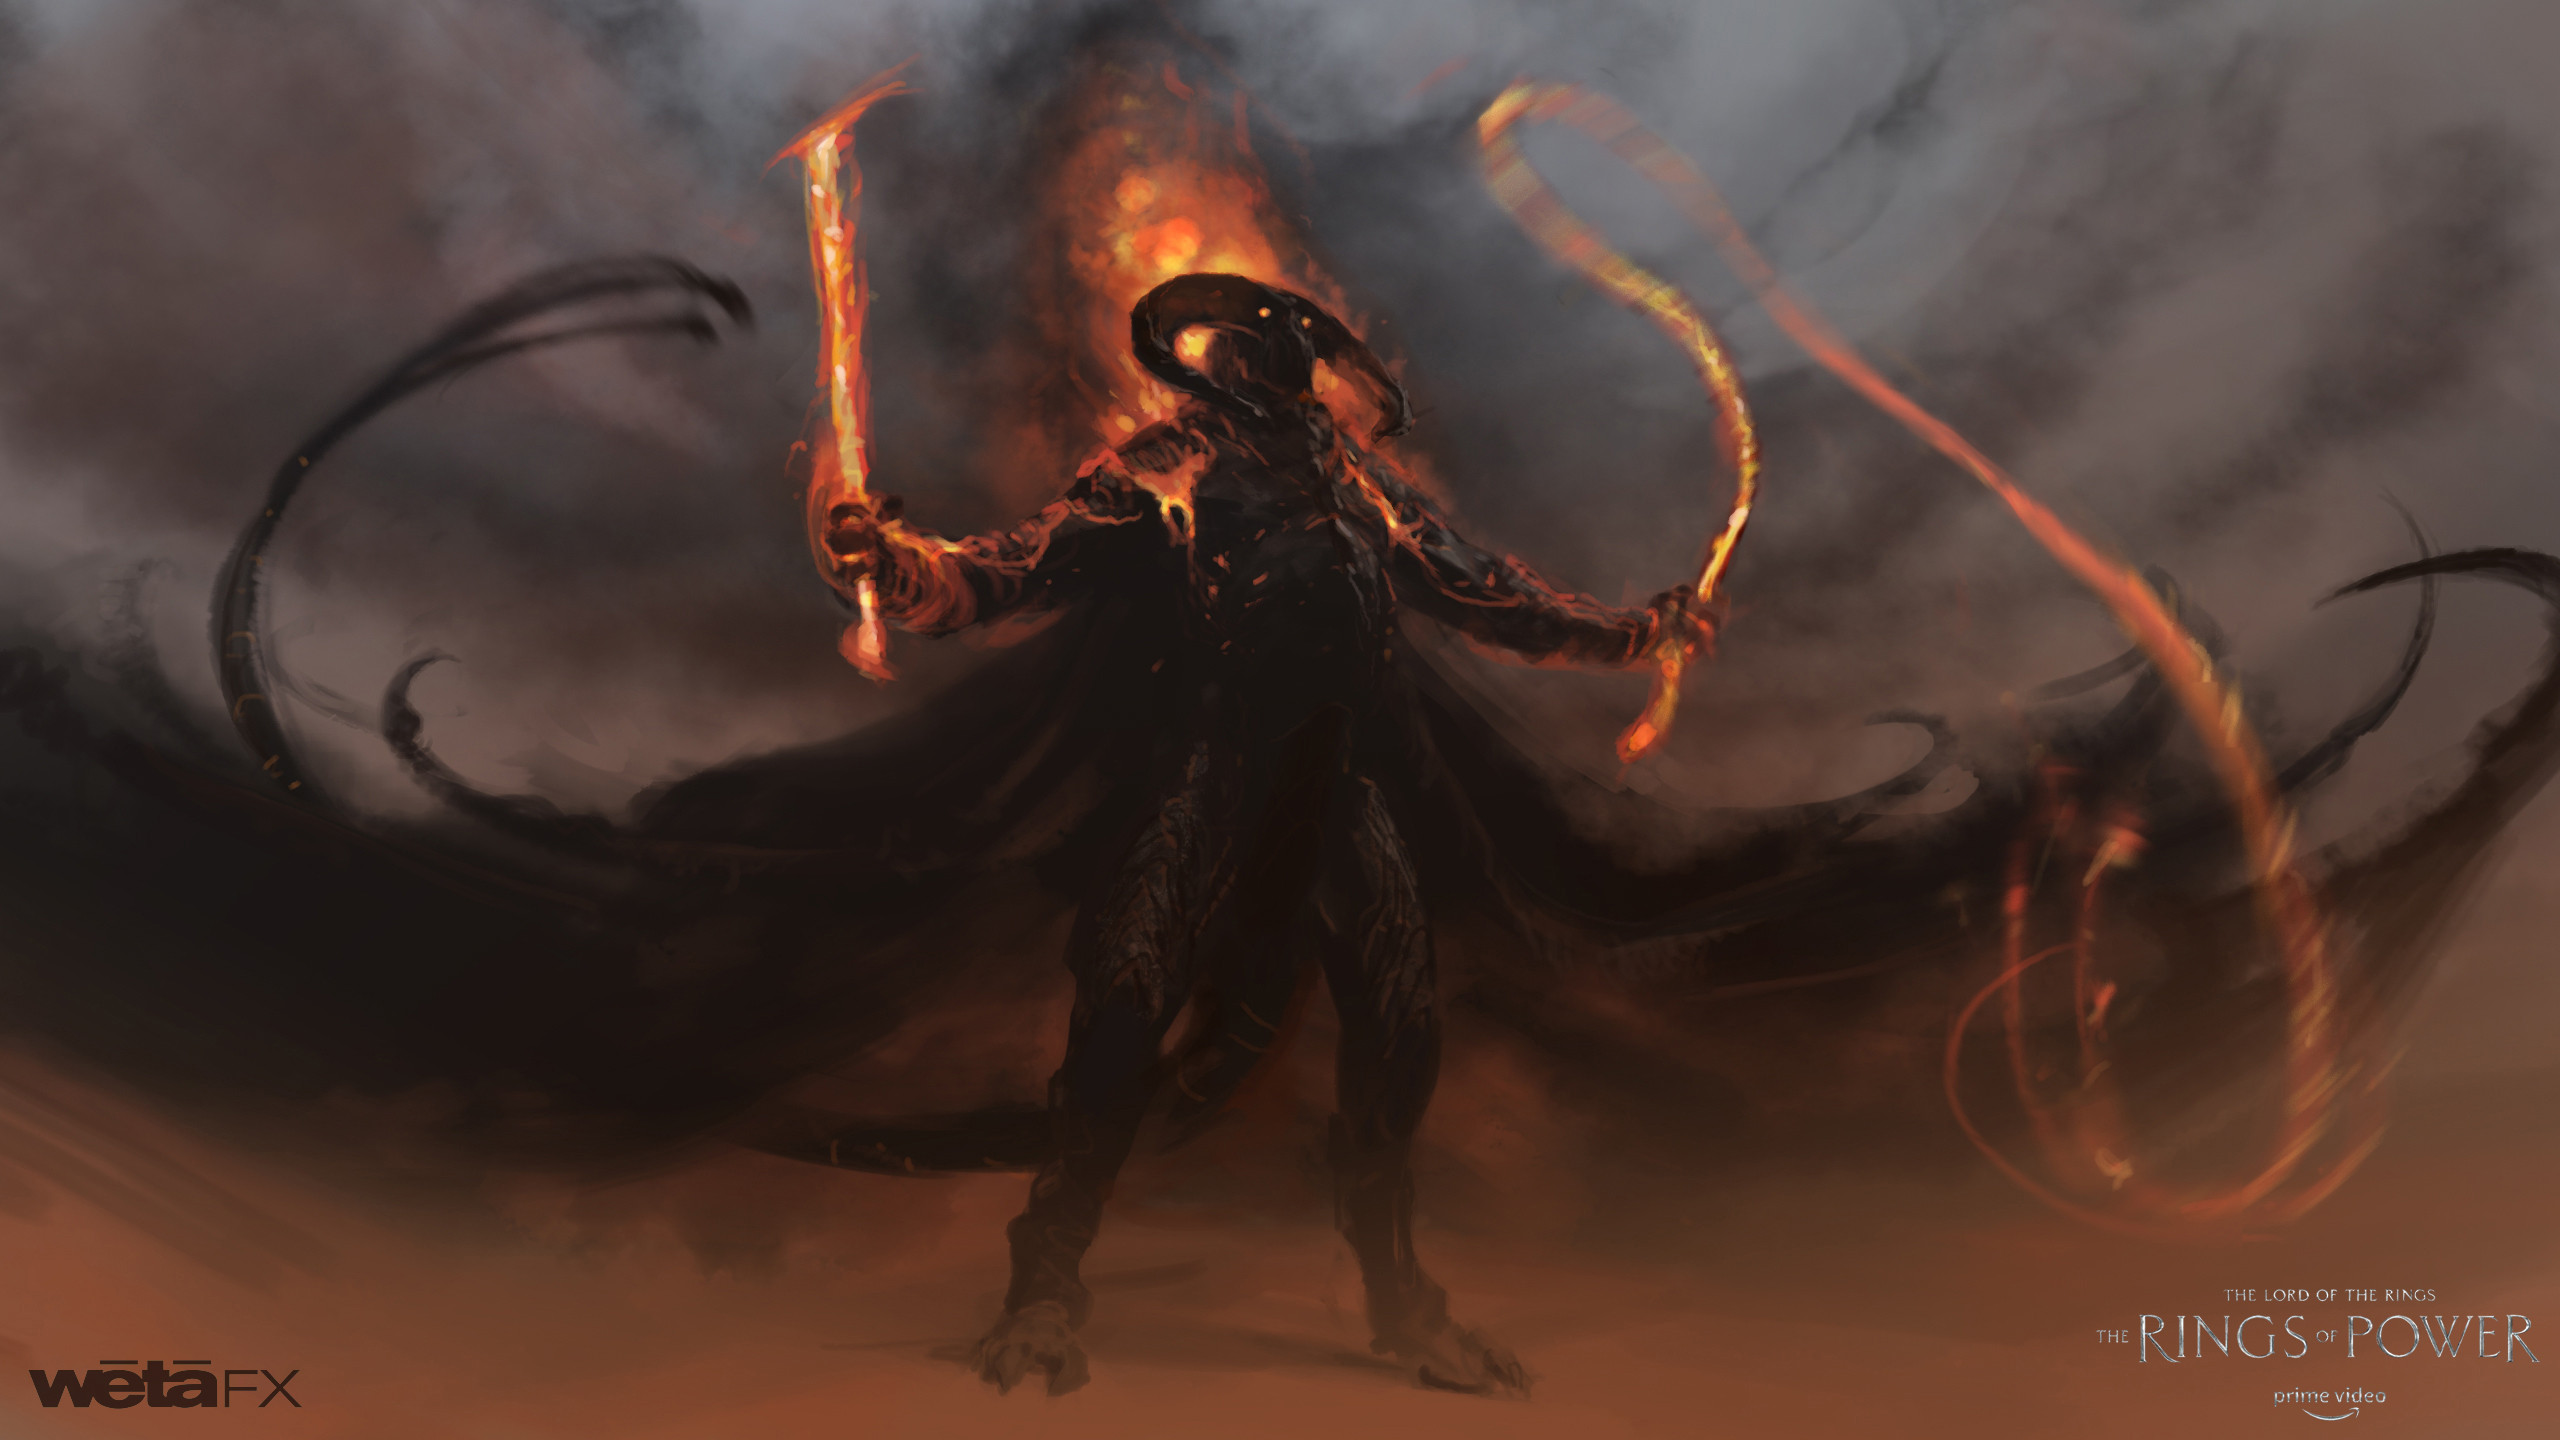 First pass sketch. I really liked the idea of seeing Durin's bane in this much earlier time in a humanoid form without wings (more vast, shadowy cloak). The notion being that this spirit of shadow and flame would manifest differently at different times.